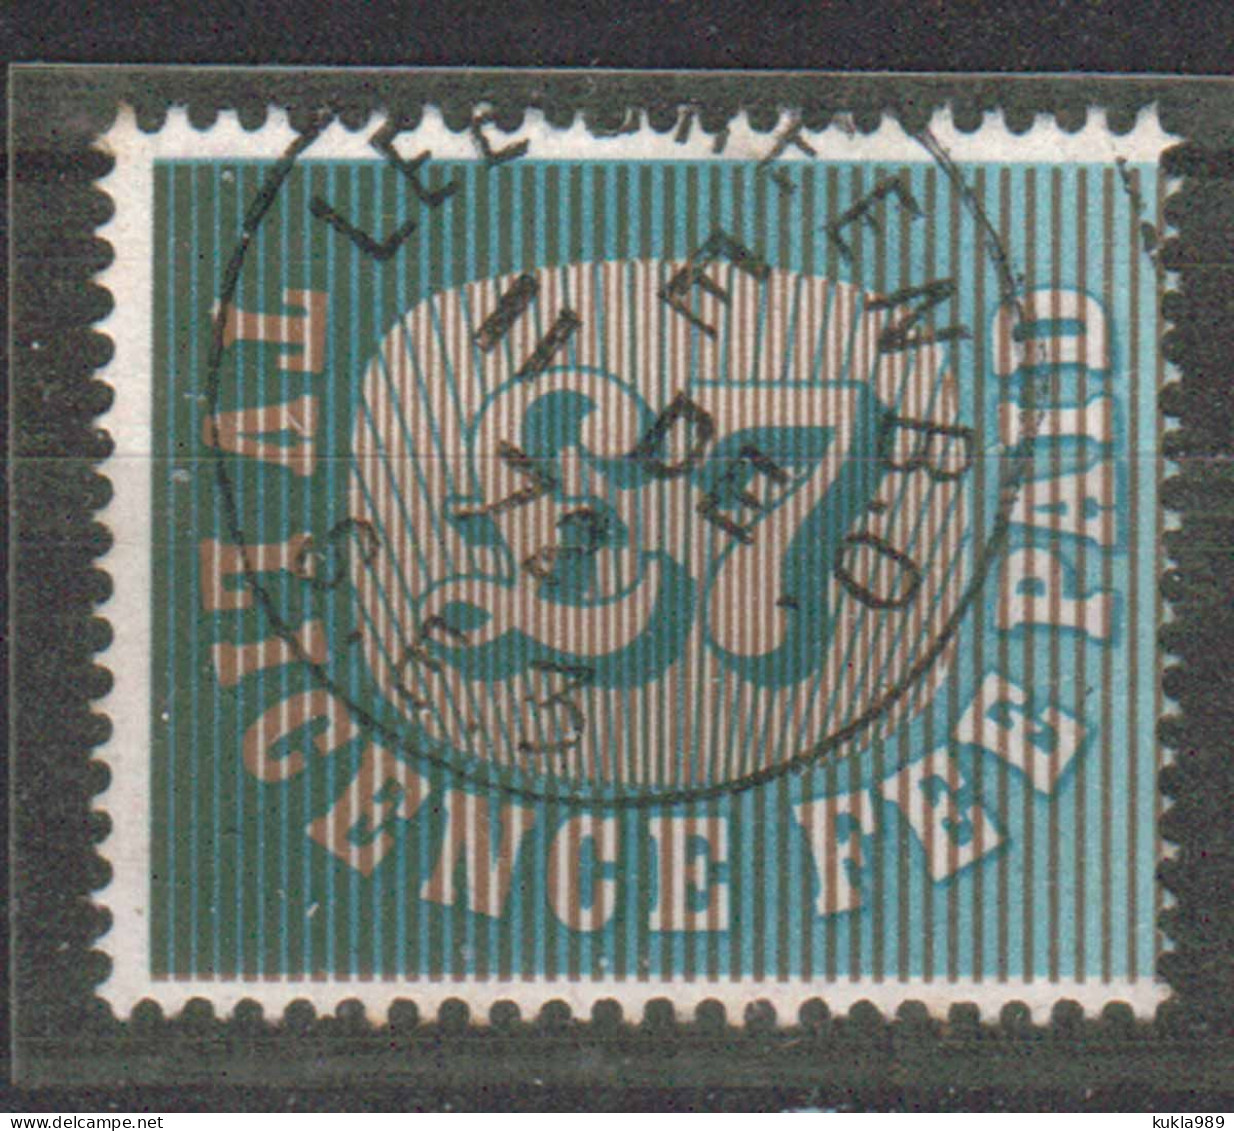 GB STAMP REVENUE TAX TV LICENCE FEE PAID, 1970s, USED - Fiscale Zegels